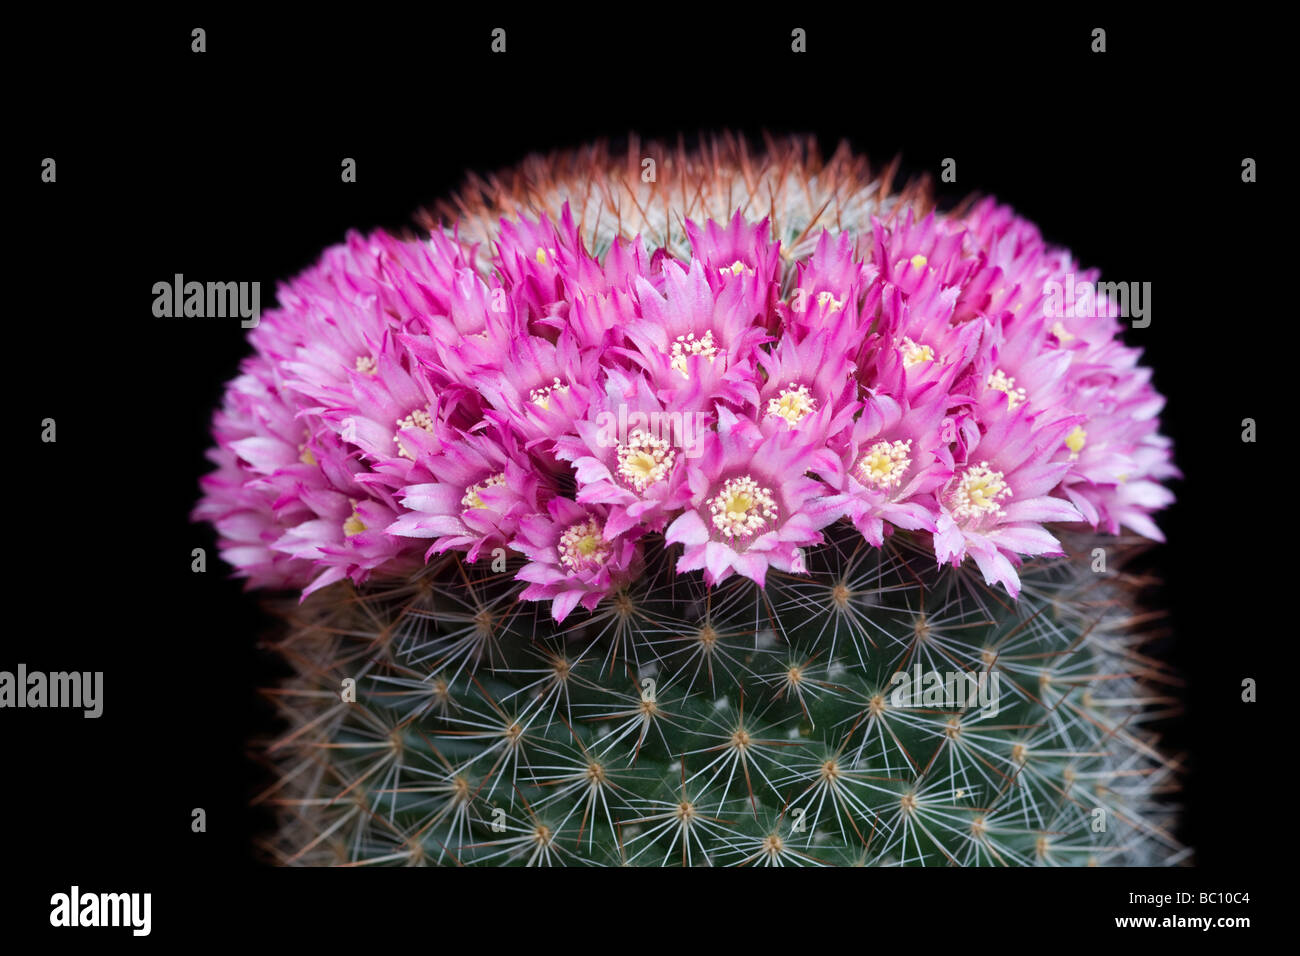 A succulent in bloom:the Mammillaria centraliplumosa. Cactus (Mammillaria centraliplumosa) en fleurs. Stock Photo